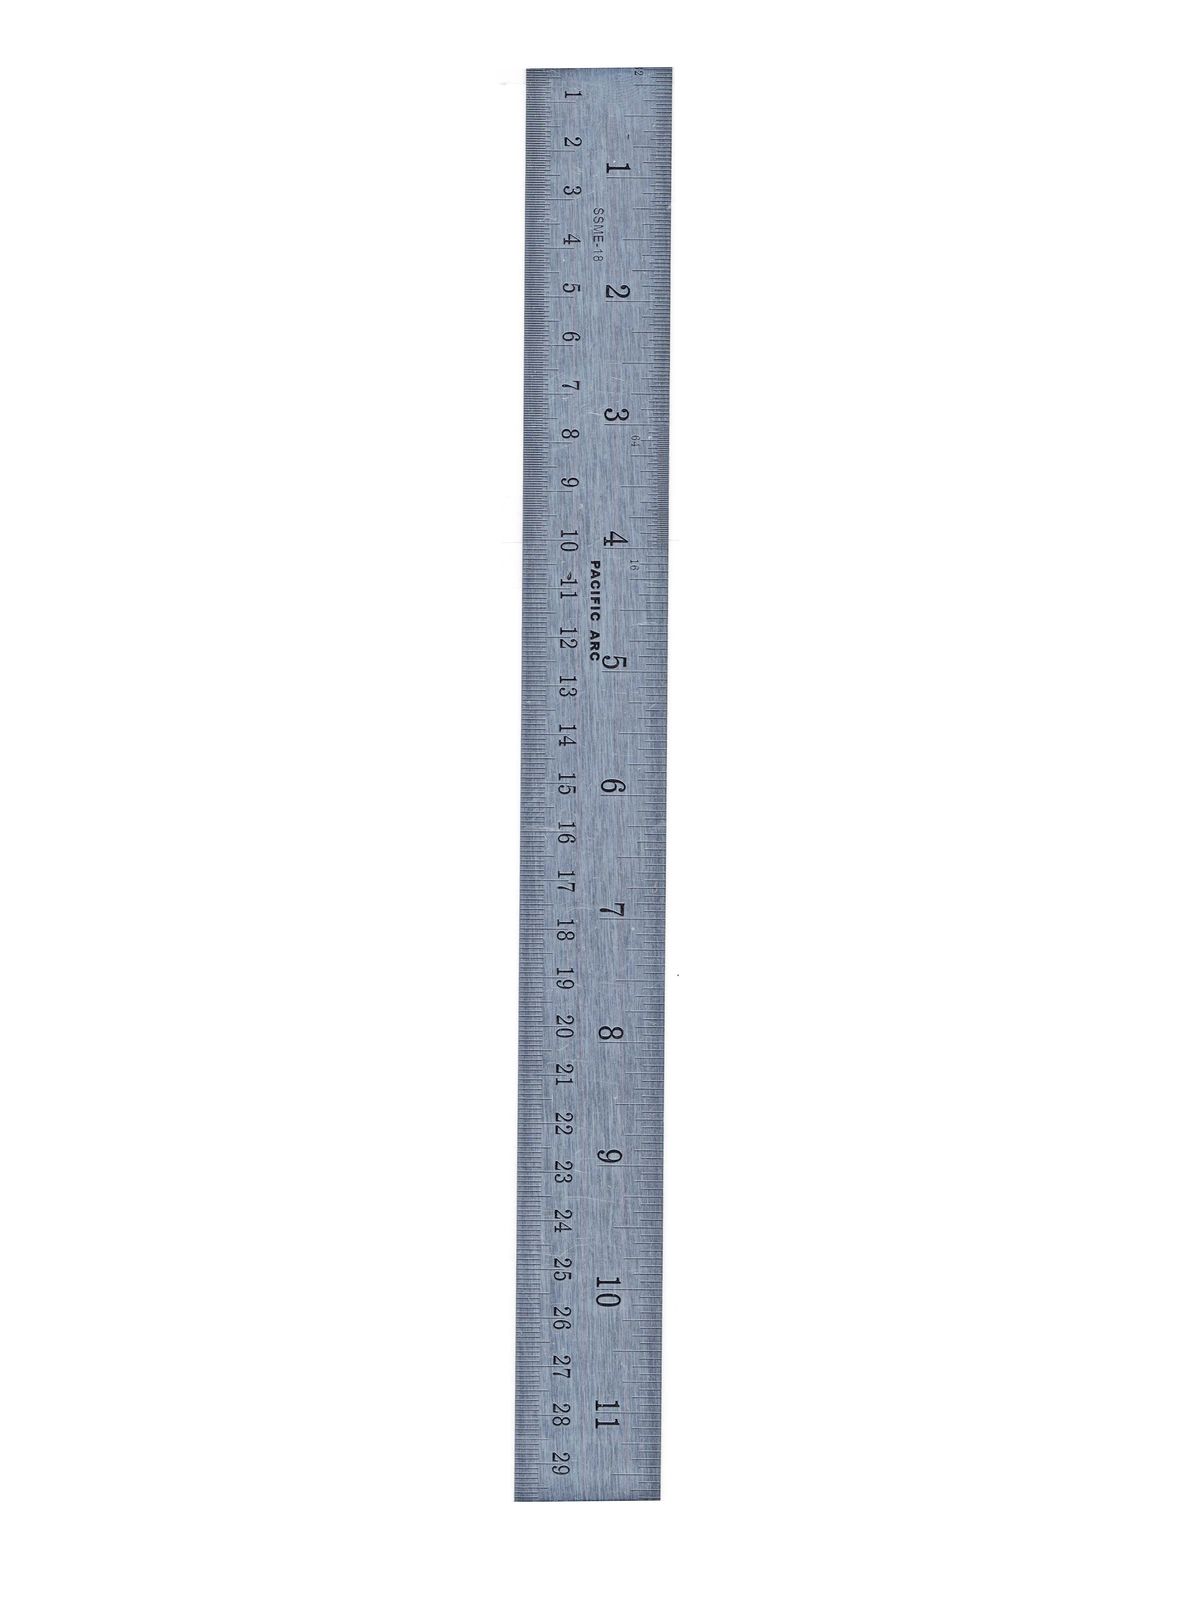 Stainless Steel Rulers Inch Metric With Conversion Table 18 In.